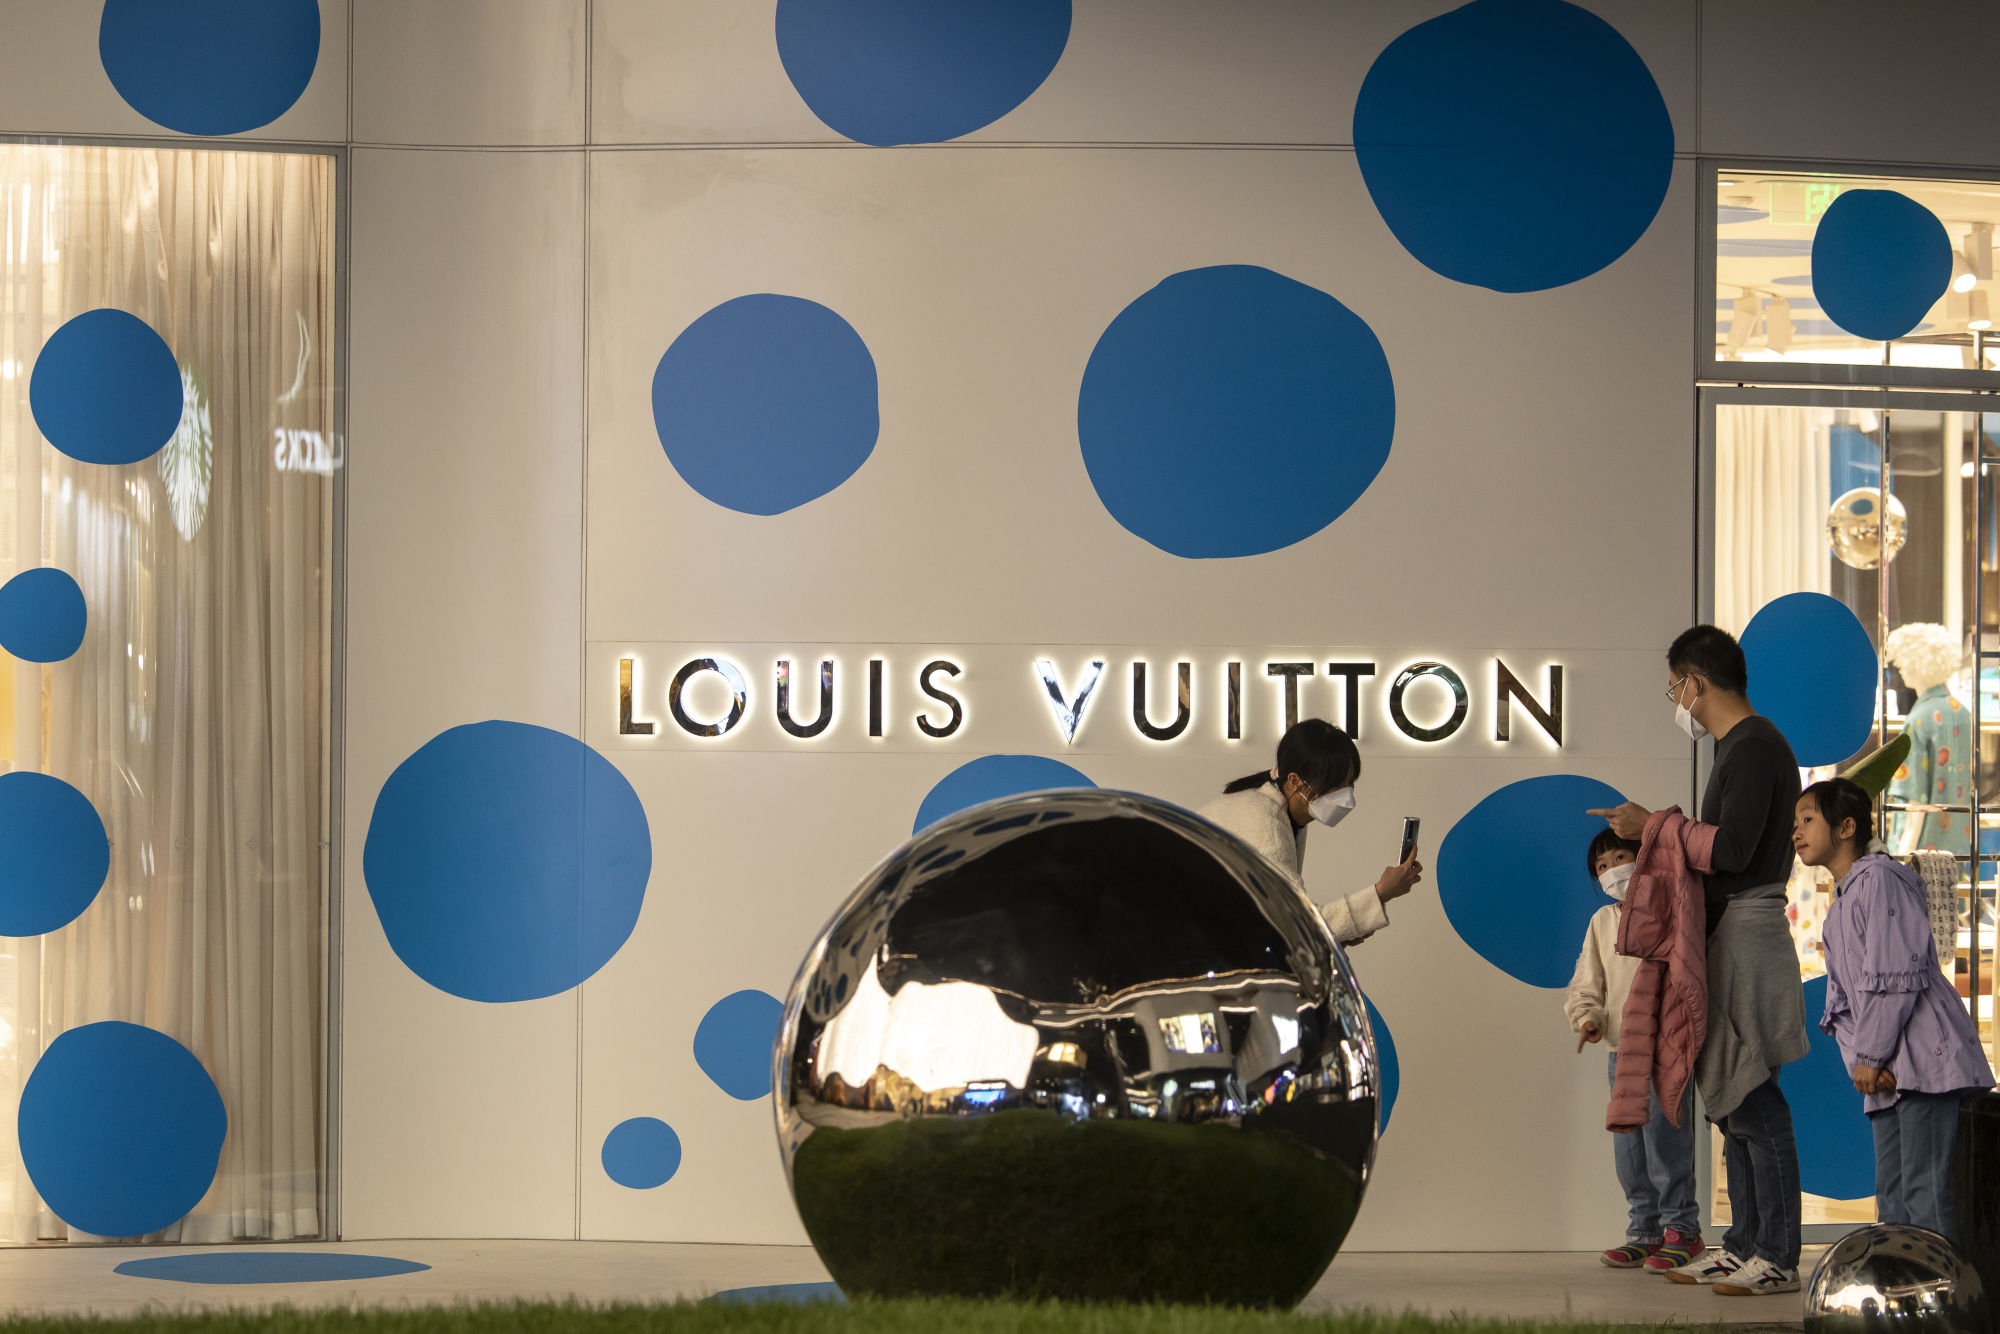 LVMH sees share price jump as owner visits China - Global Times